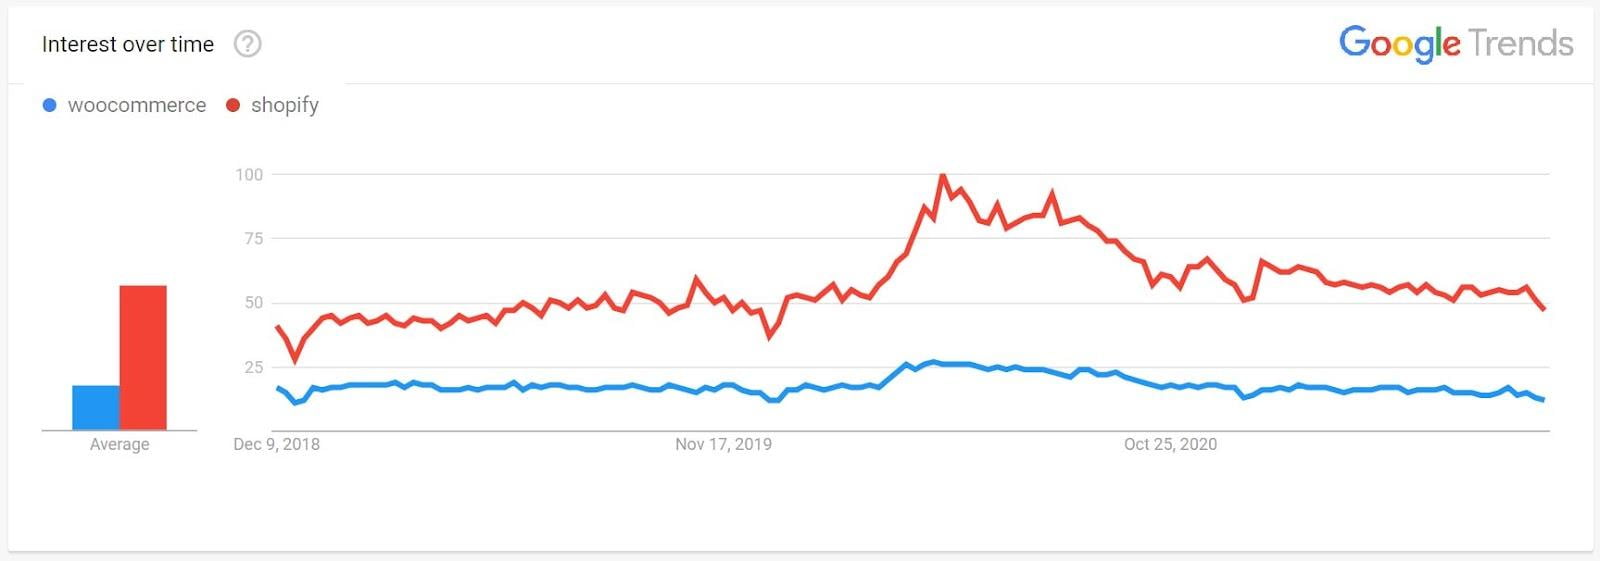 Shopify and WooCommerce on Google Trends